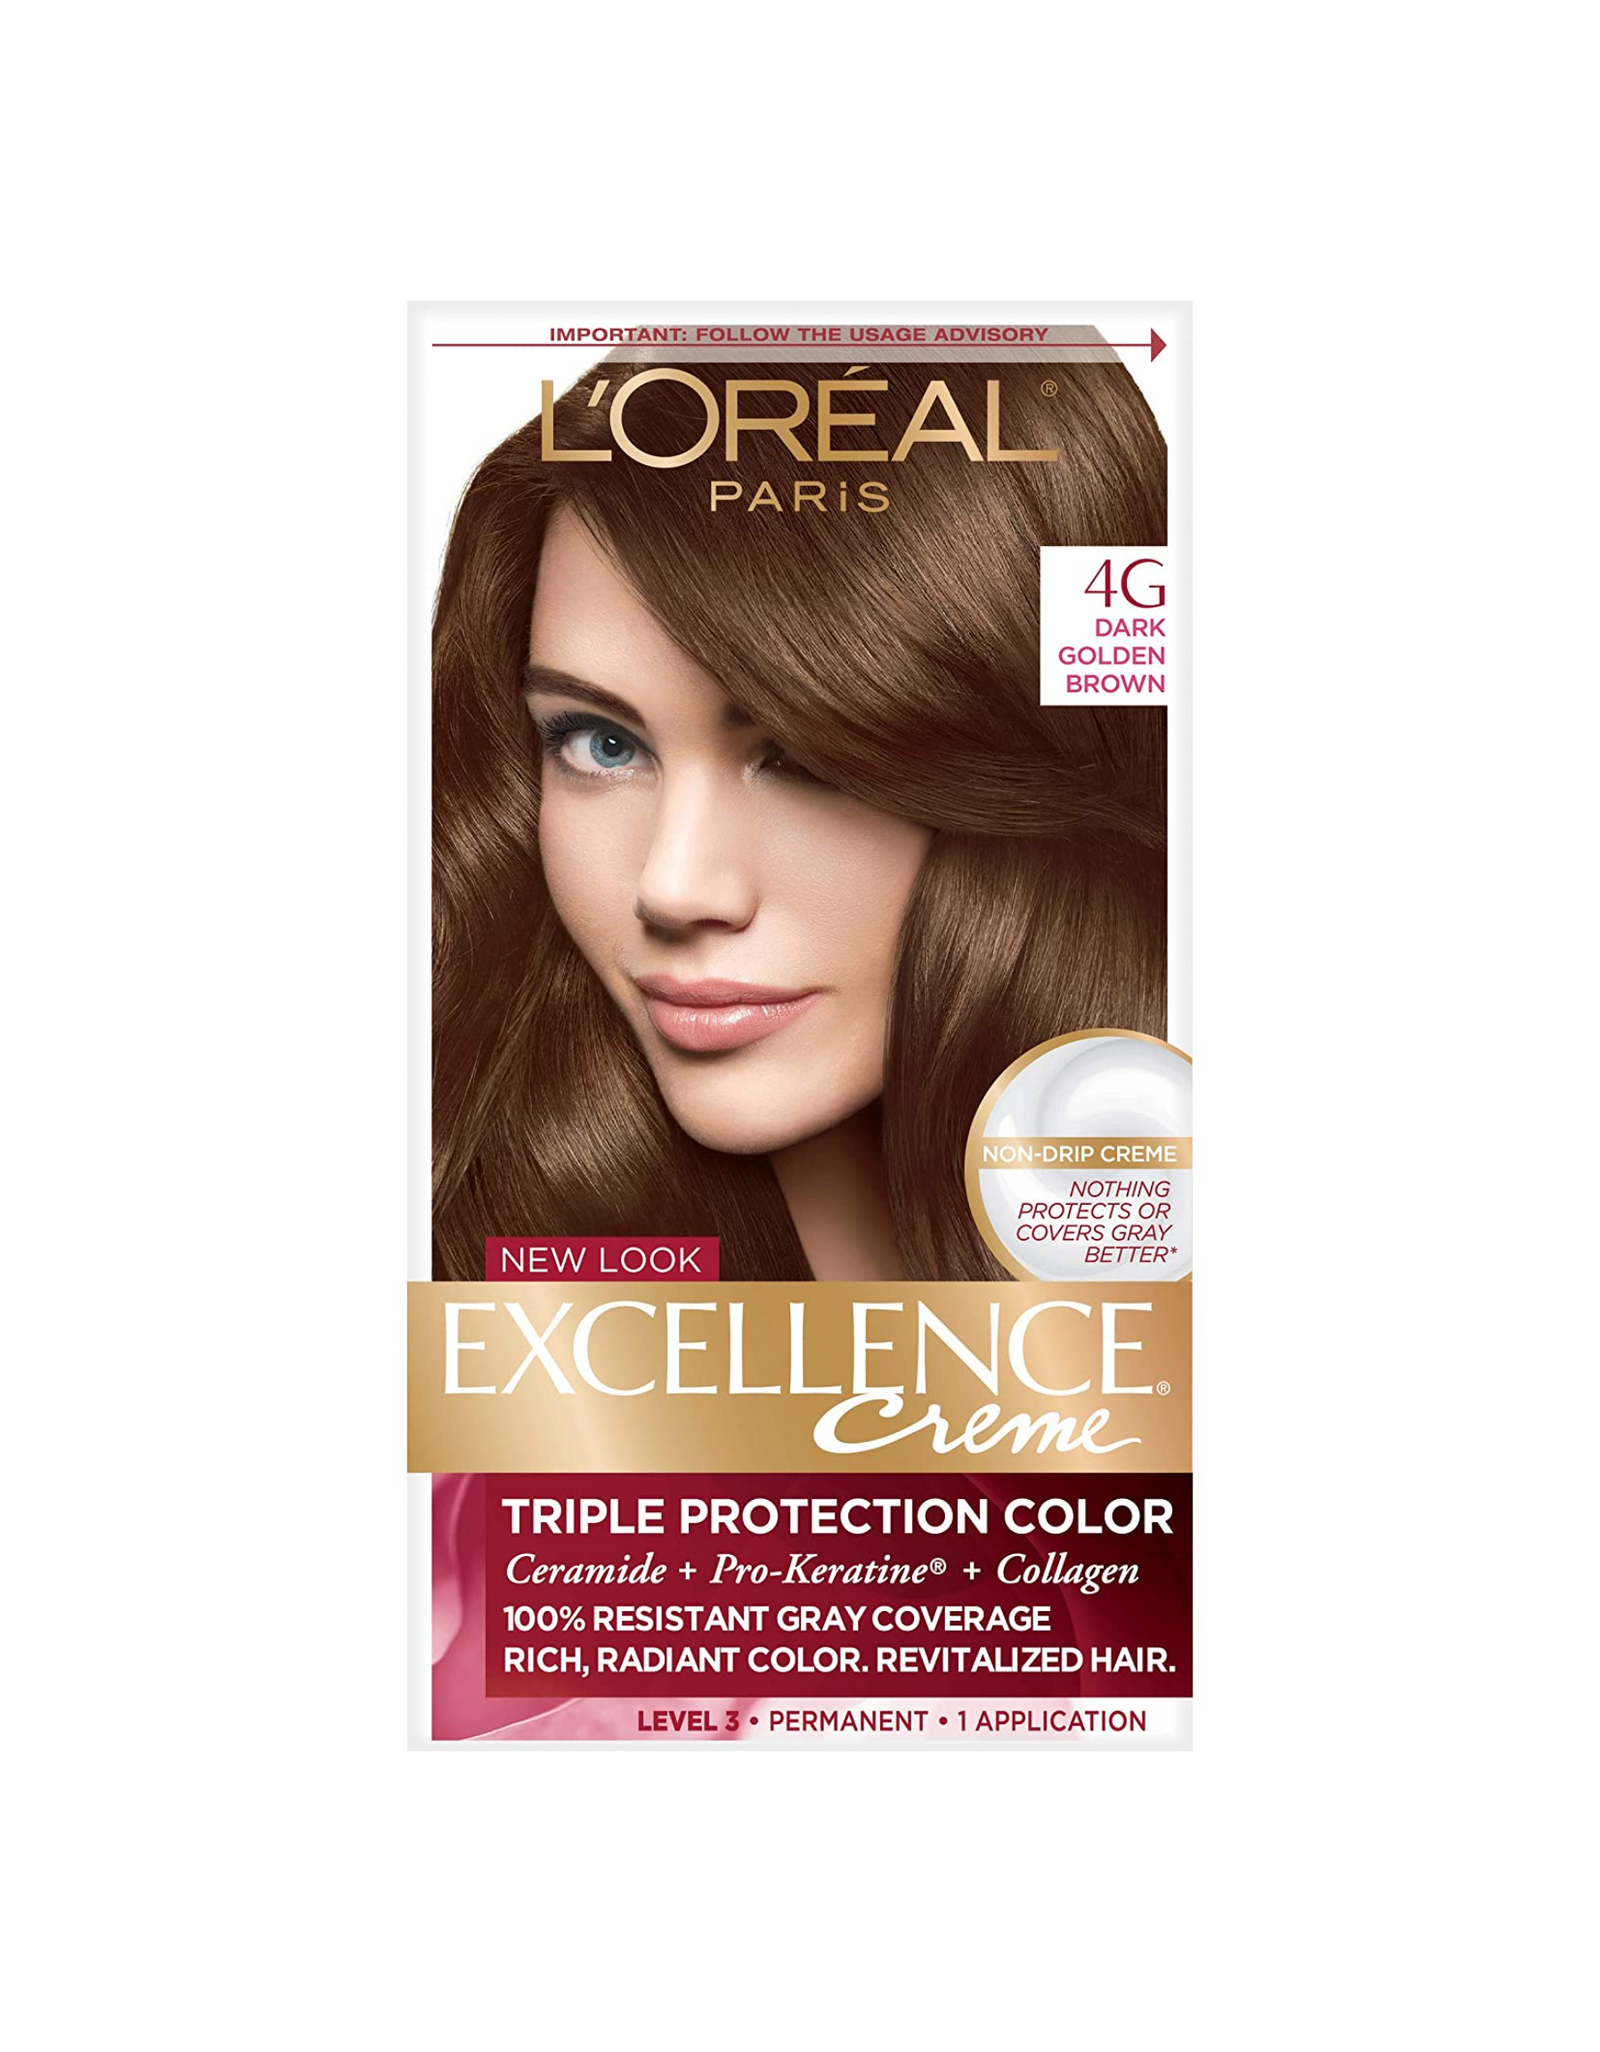 L'Oreal Paris Excellence Creme with Triple Protection Color, 4G Dark Golden Brown, 1 Ct (Pack of 1)